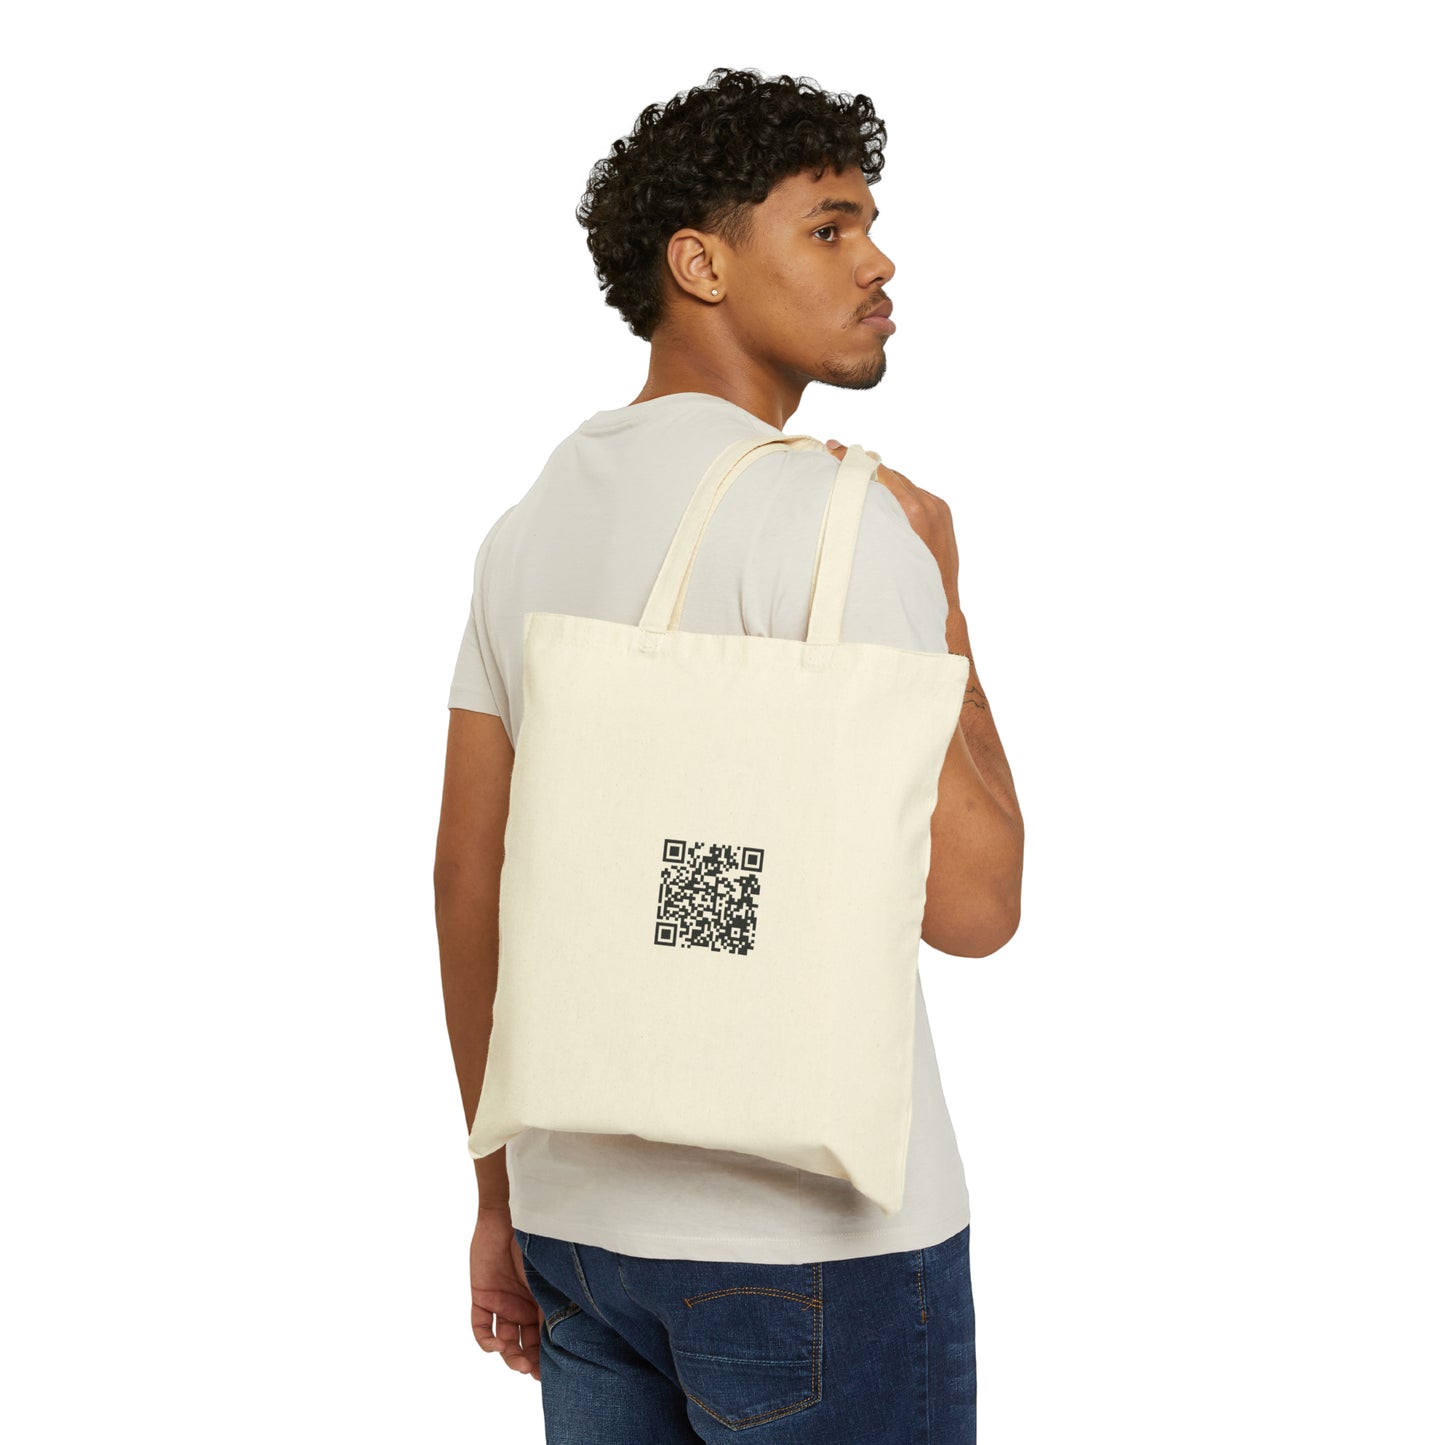 The Vienna Connection - Cotton Canvas Tote Bag